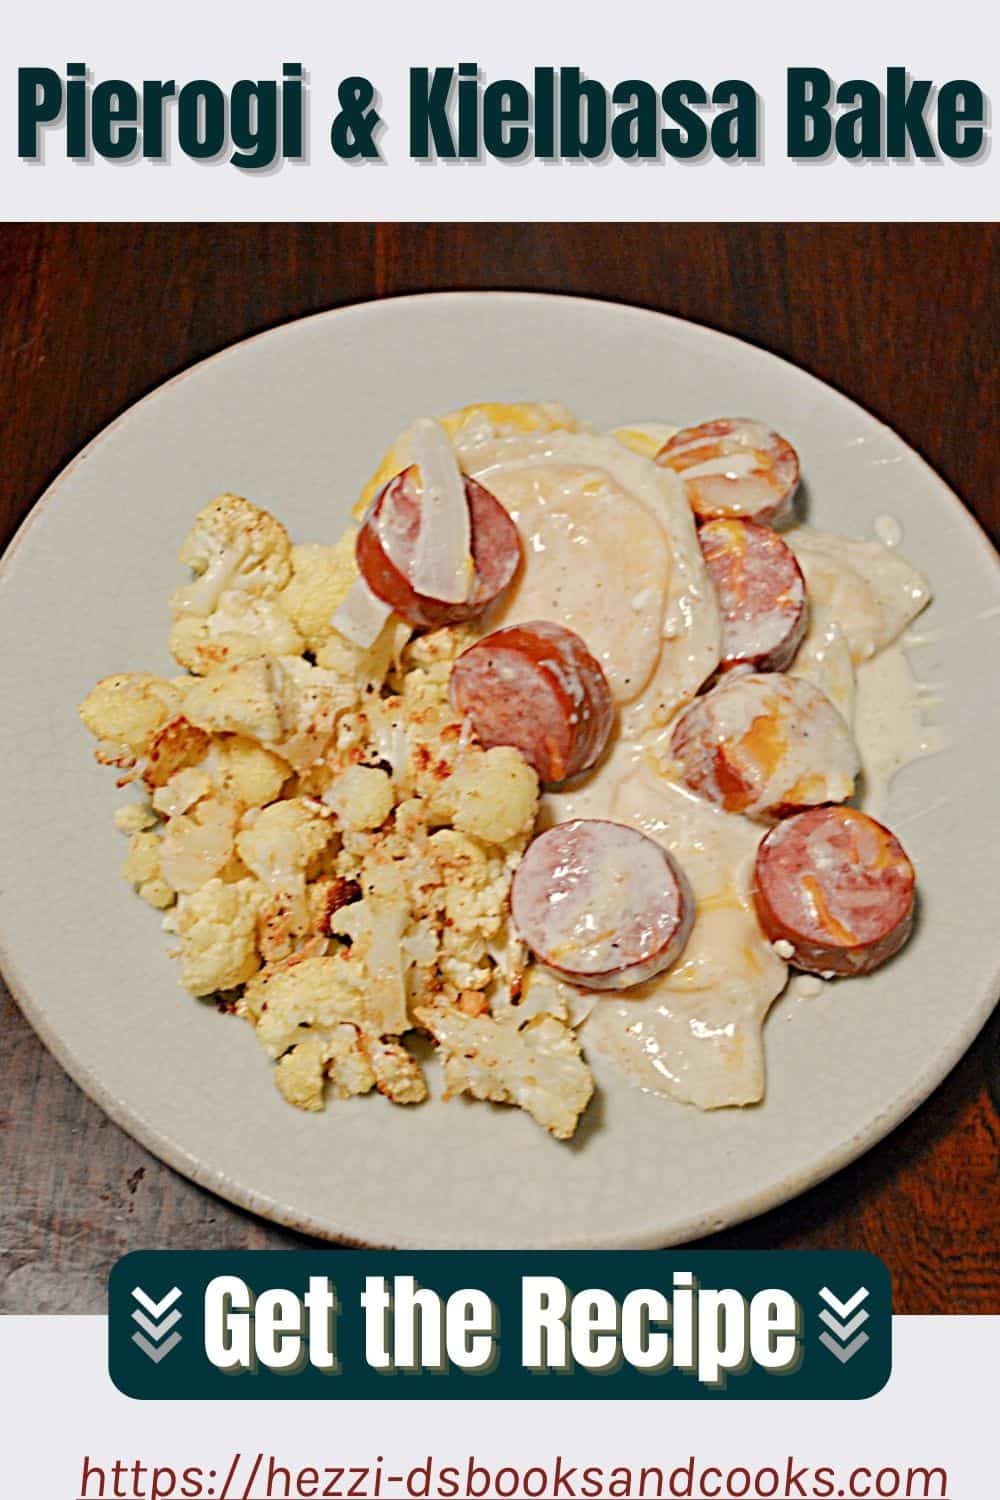 Pin Image:  Text title, a plate of pierogi and kielbasa in a white sauce with cauliflower on the side, Get the recipe with a link. 